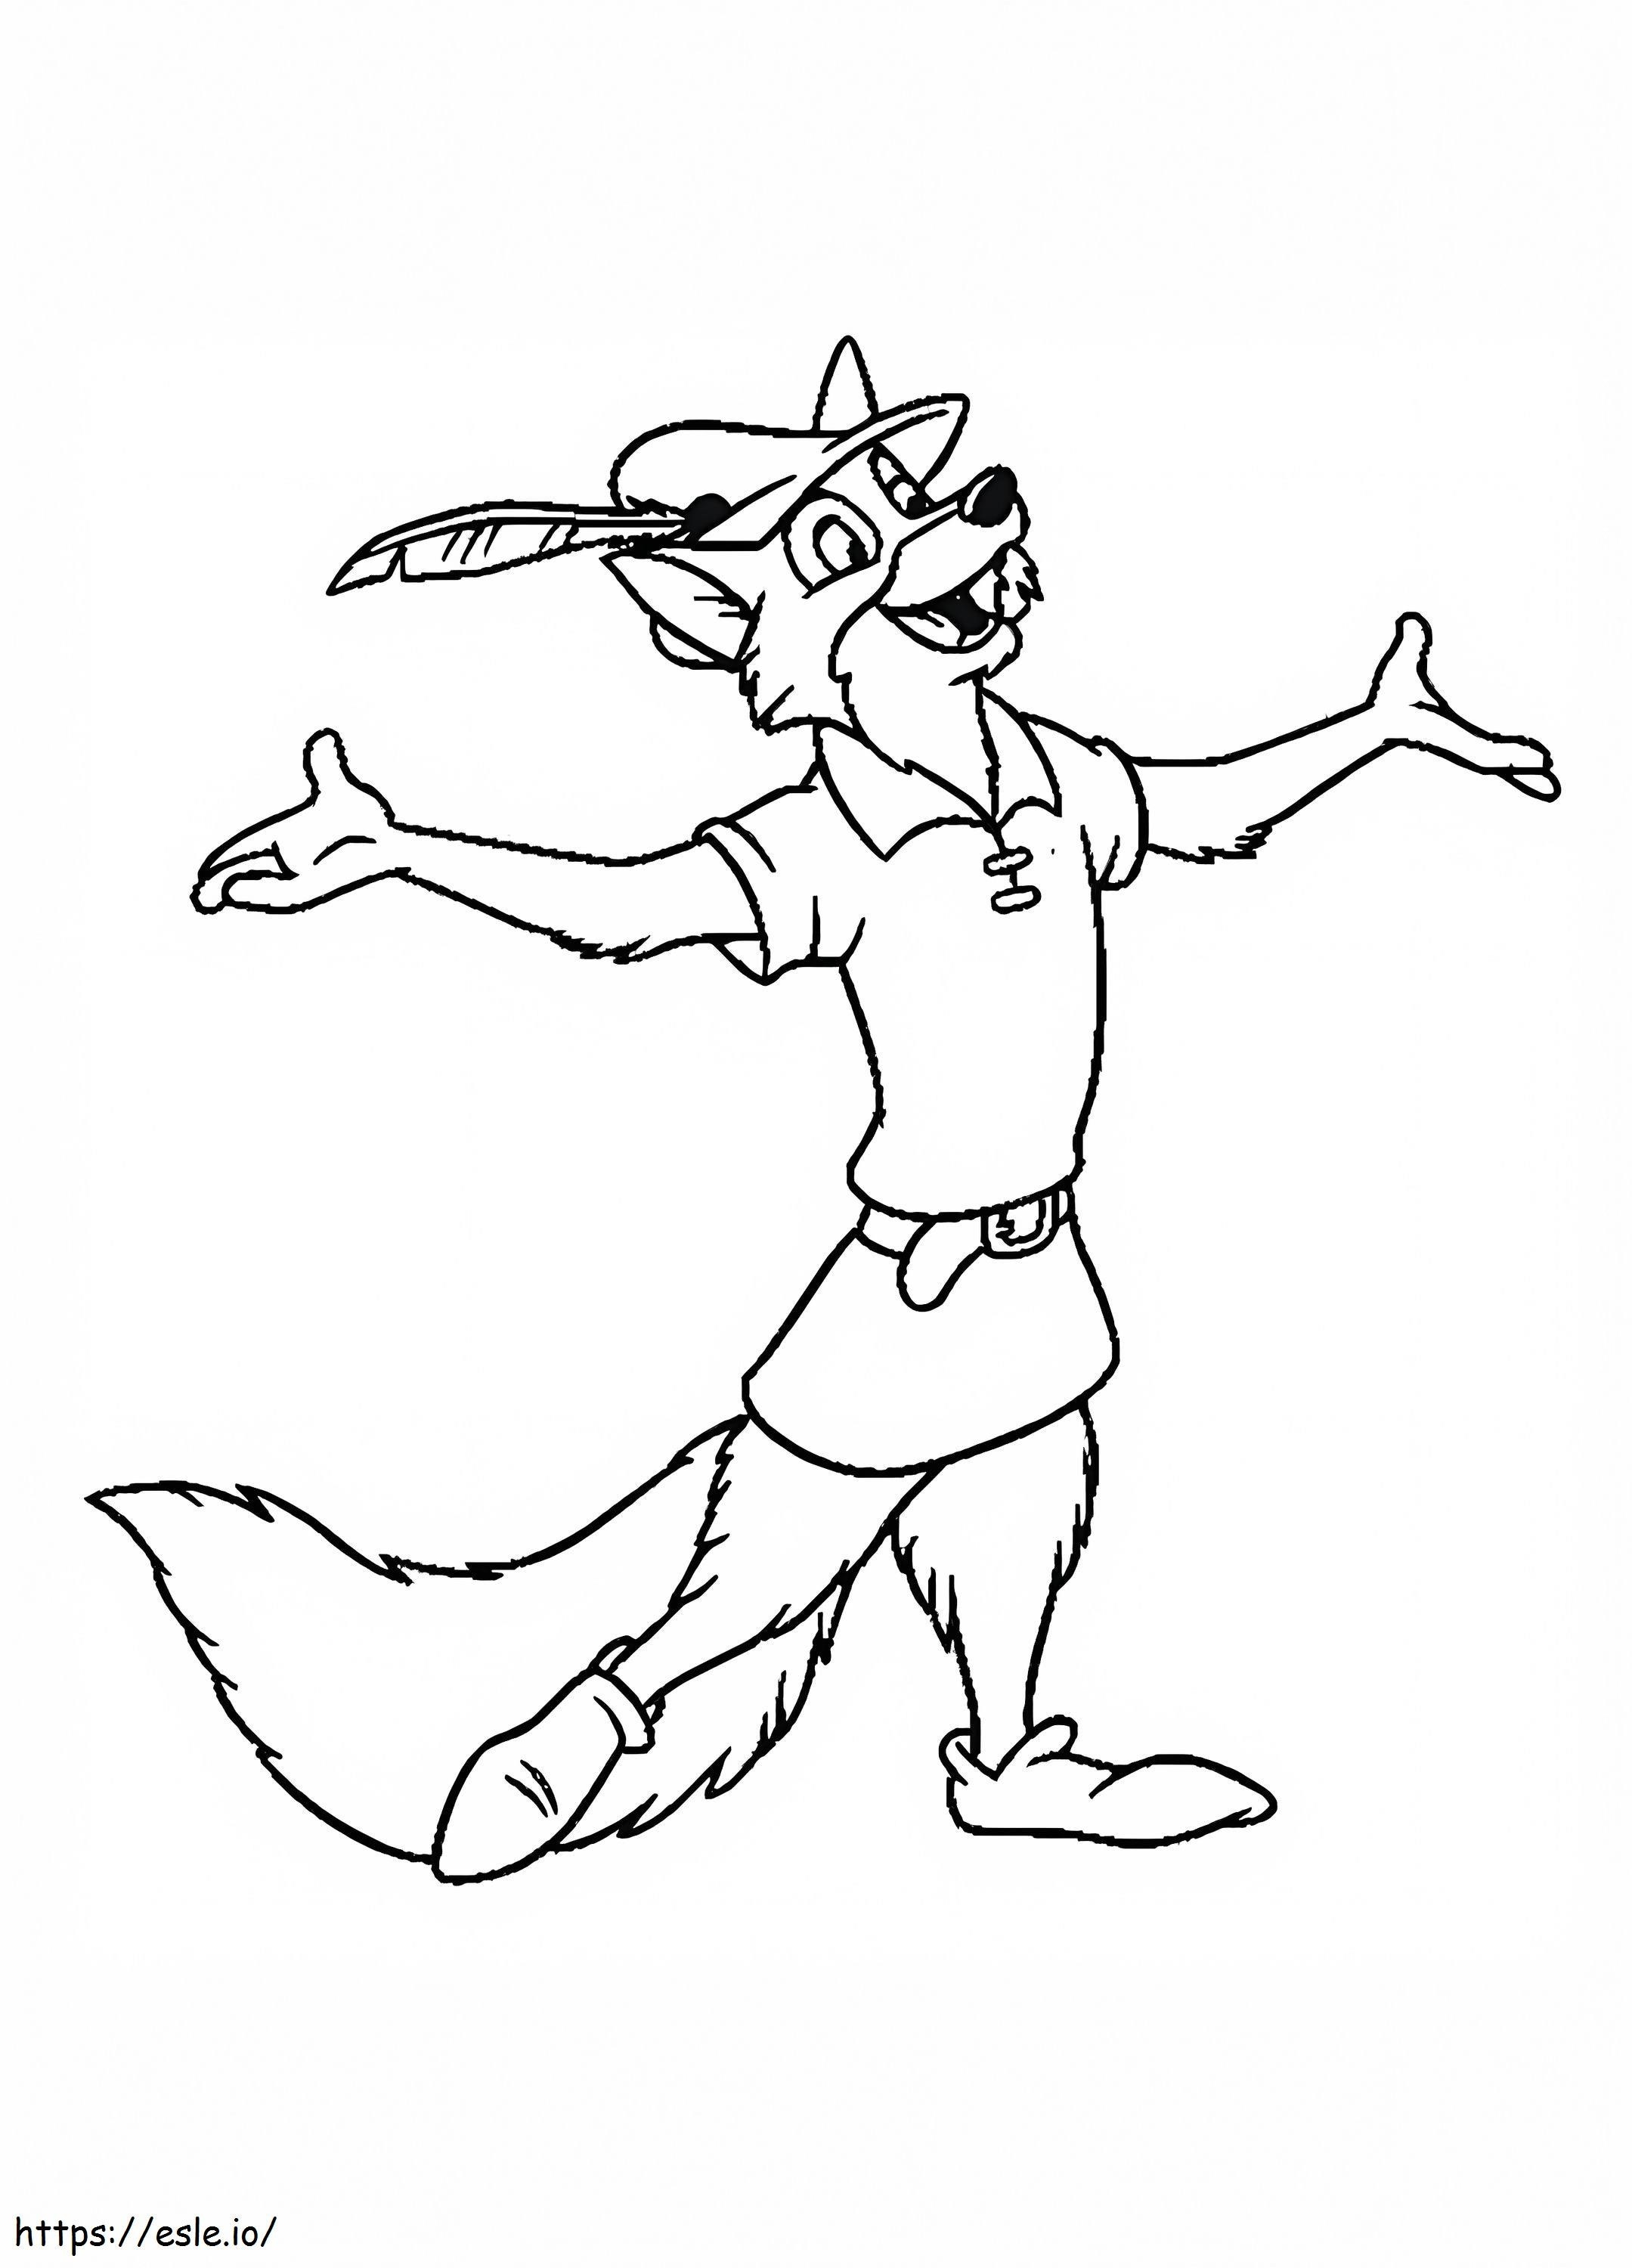 Robin Hood 4 coloring page